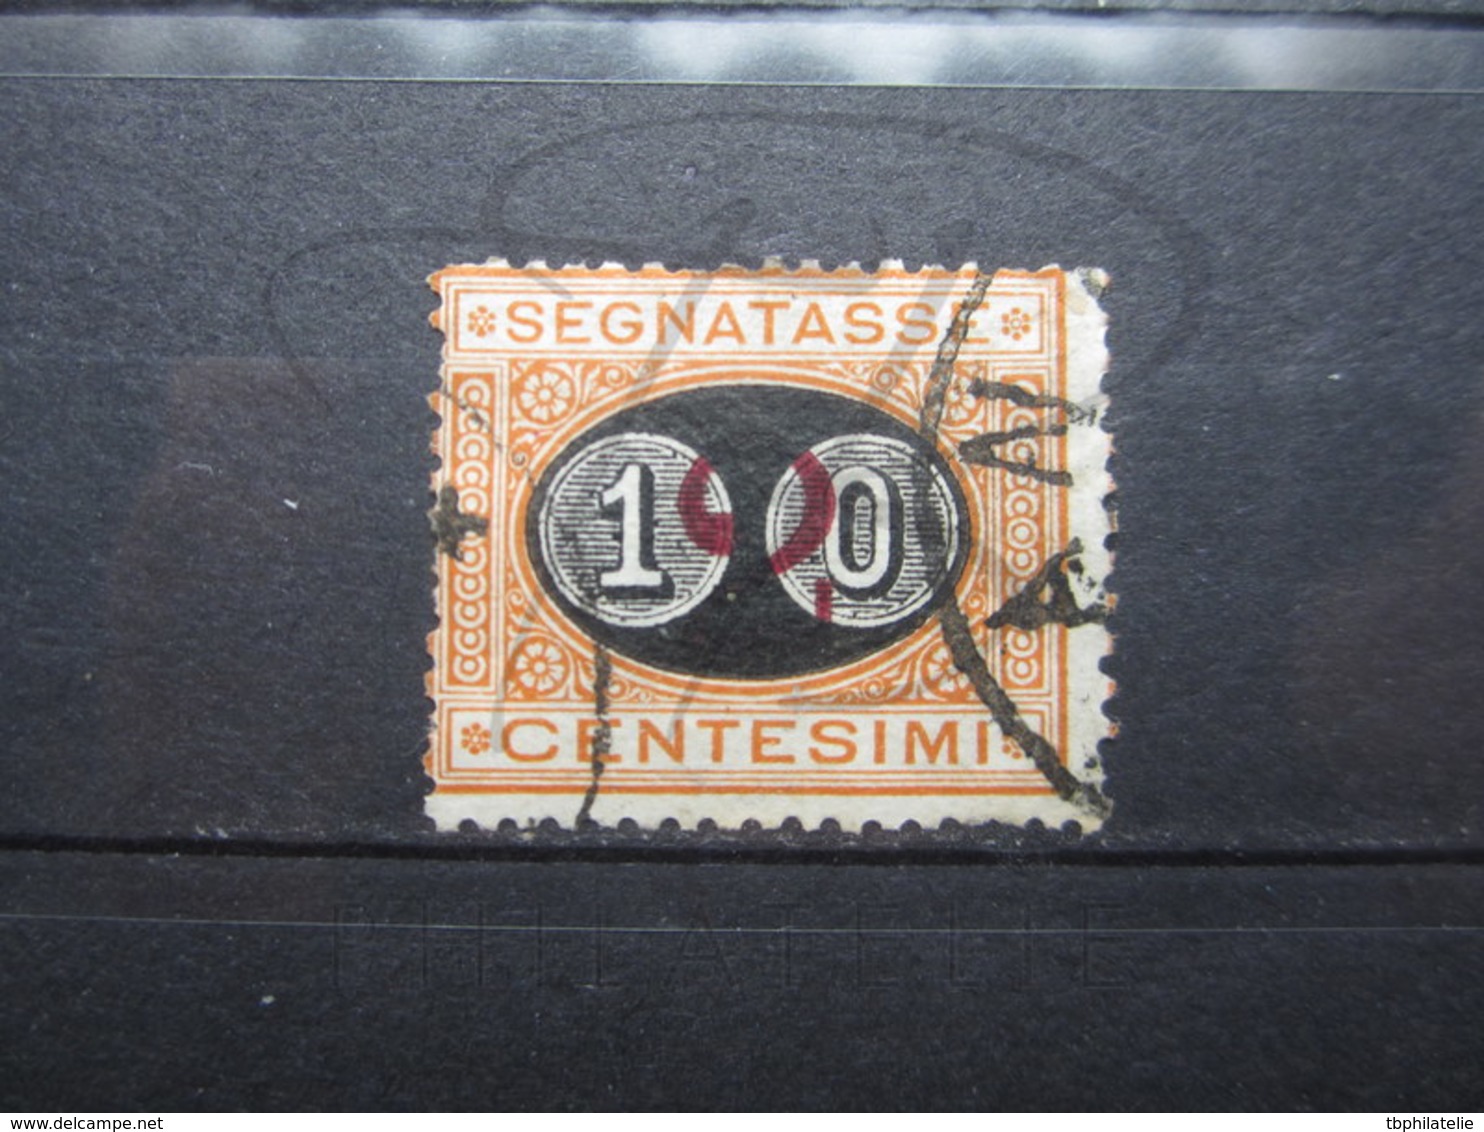 VEND TIMBRE TAXE D ' ITALIE N° 22 !!! - Postage Due